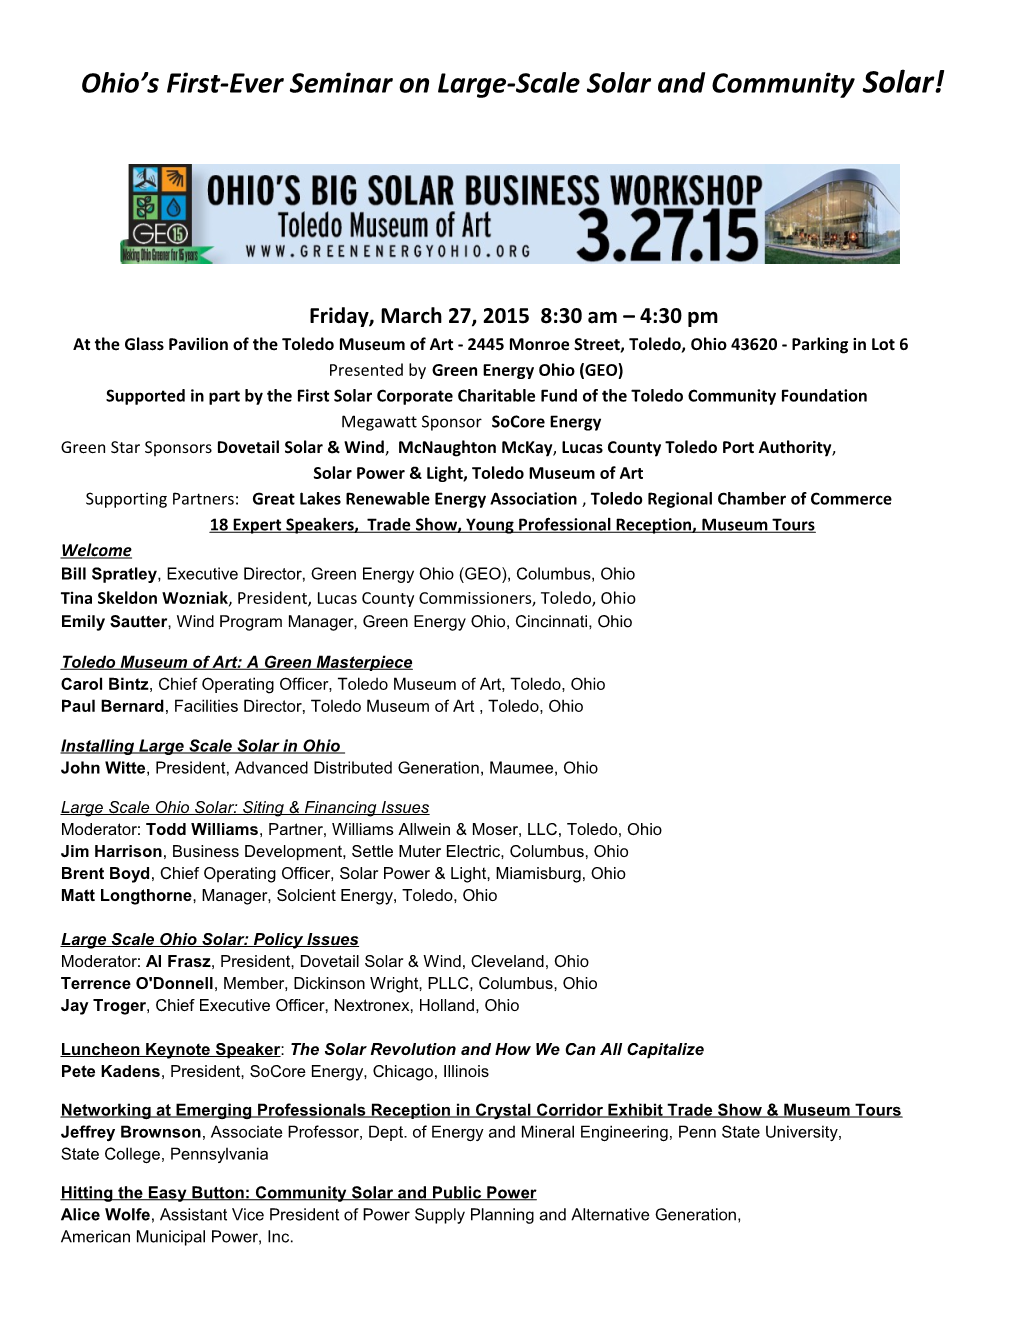 Ohio S First-Ever Seminar on Large-Scale Solar and Community Solar!